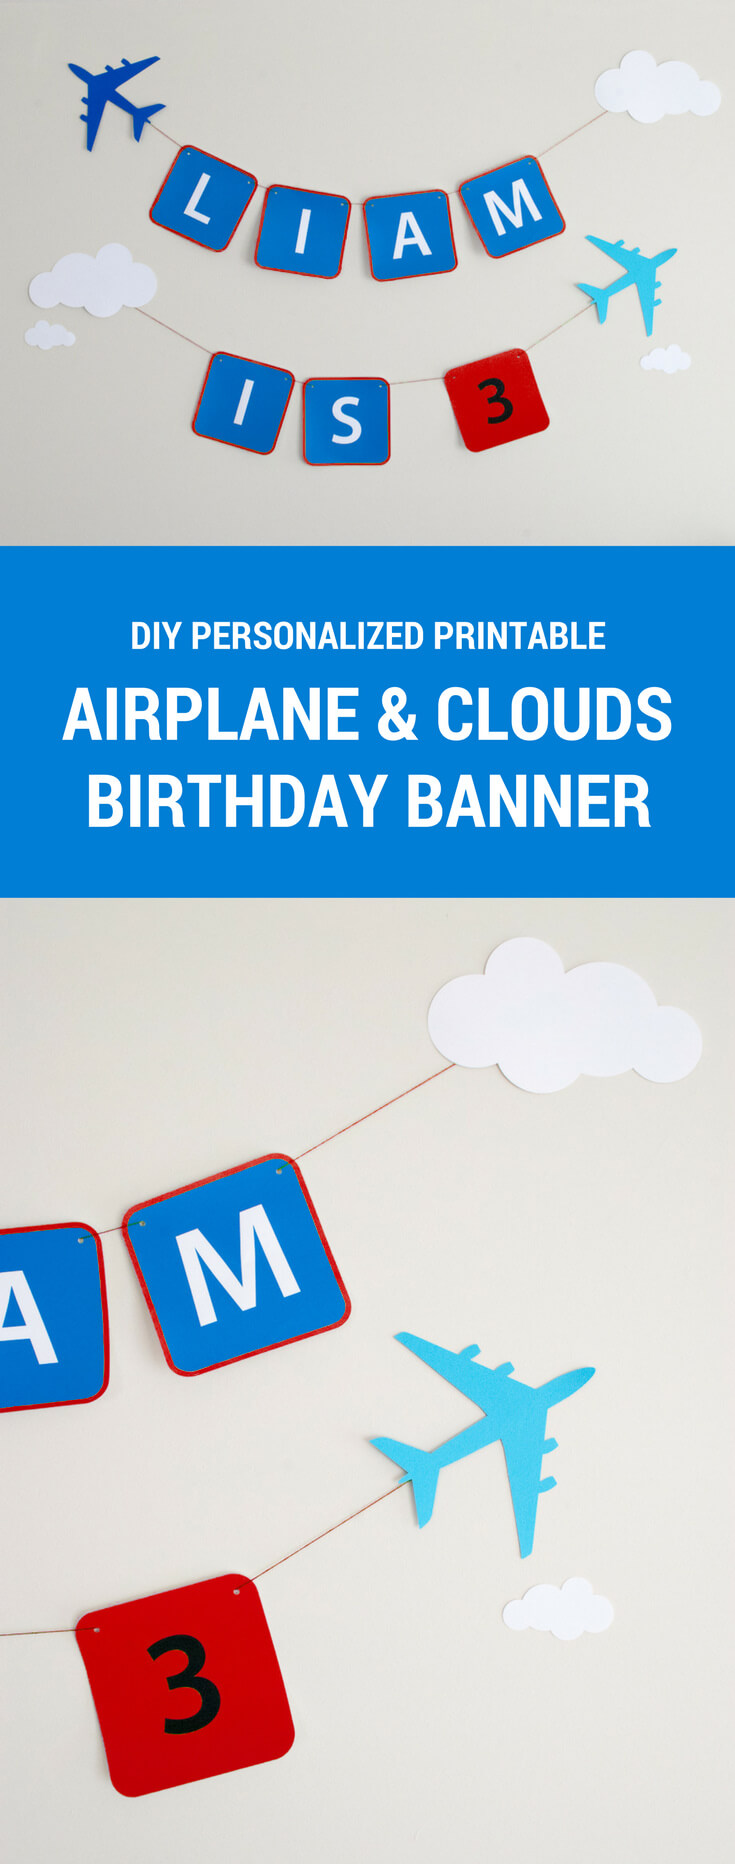 Red and blue printable airplane birthday party banner for a Modern and Classy Airplane or Airport Birthday Party. Just download, type to personalize, cut and hang!